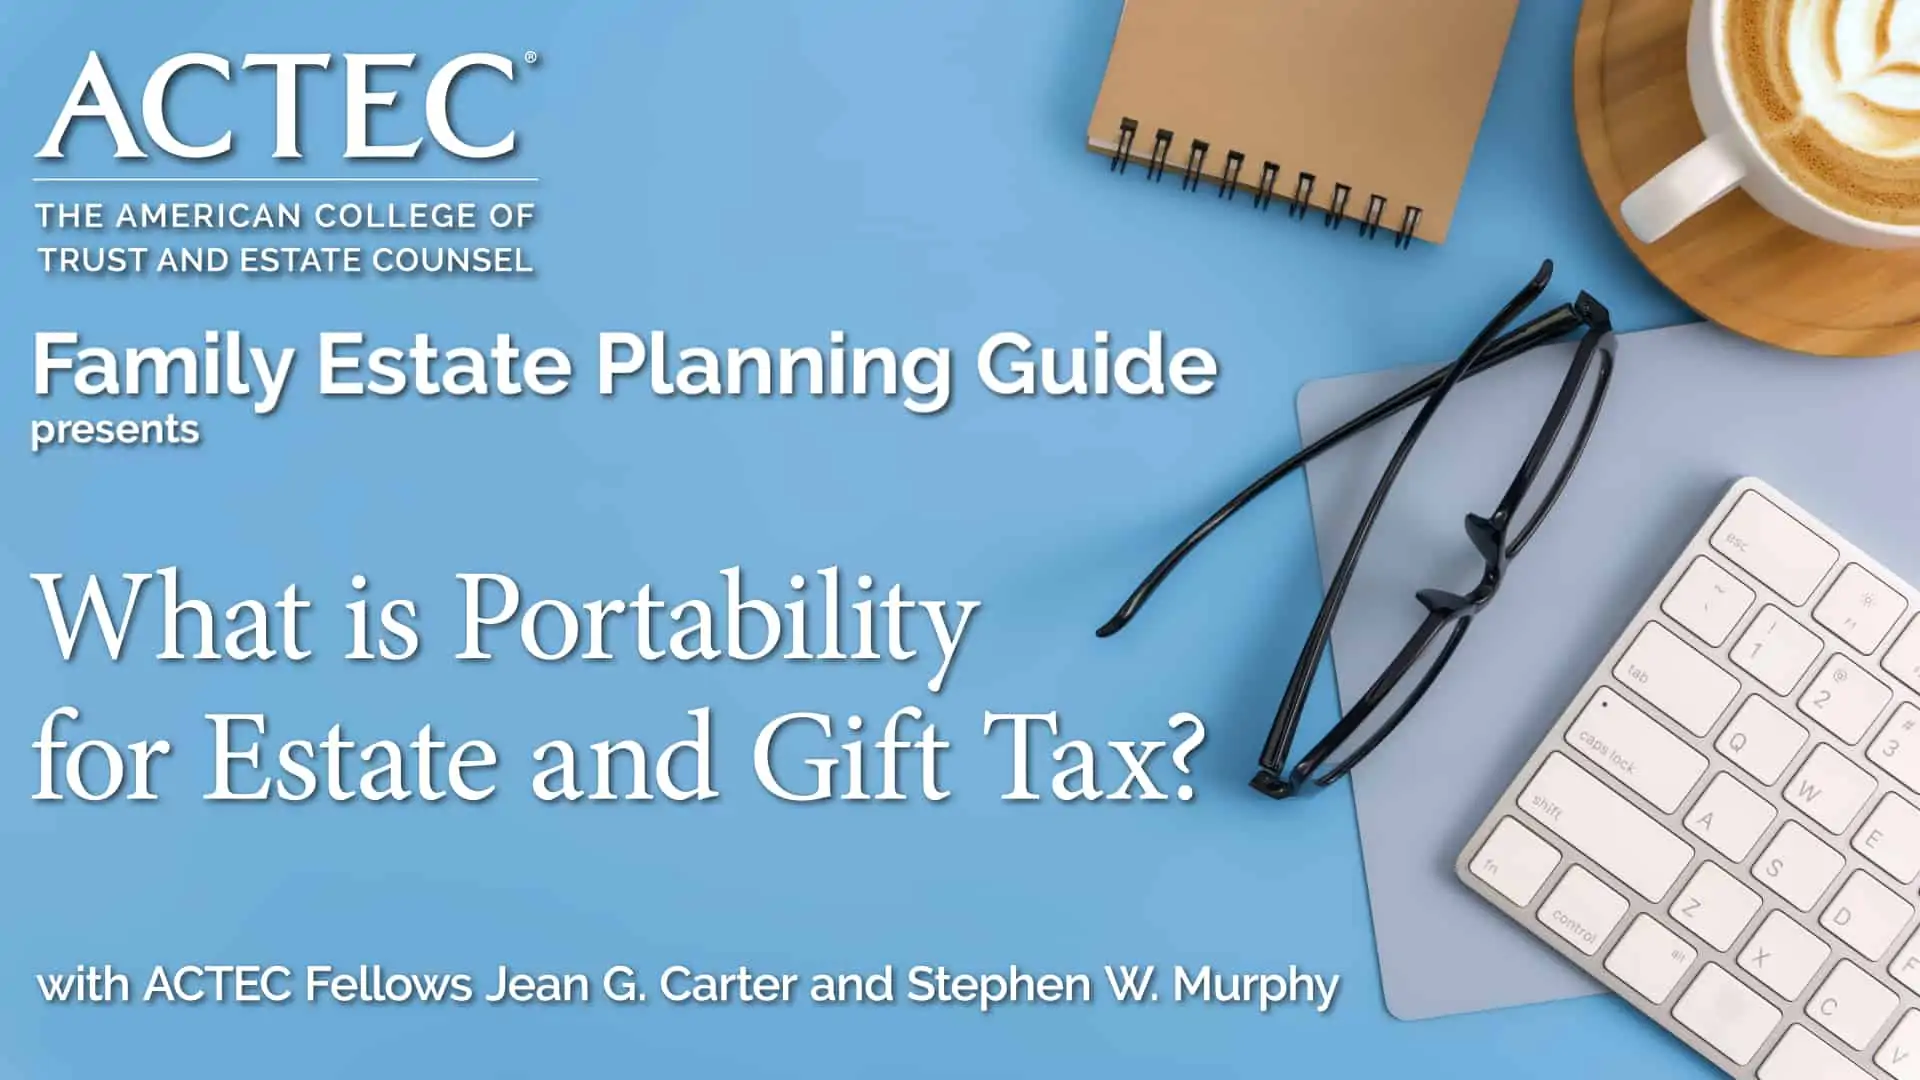 What is Portability for Estate and Gift Tax?